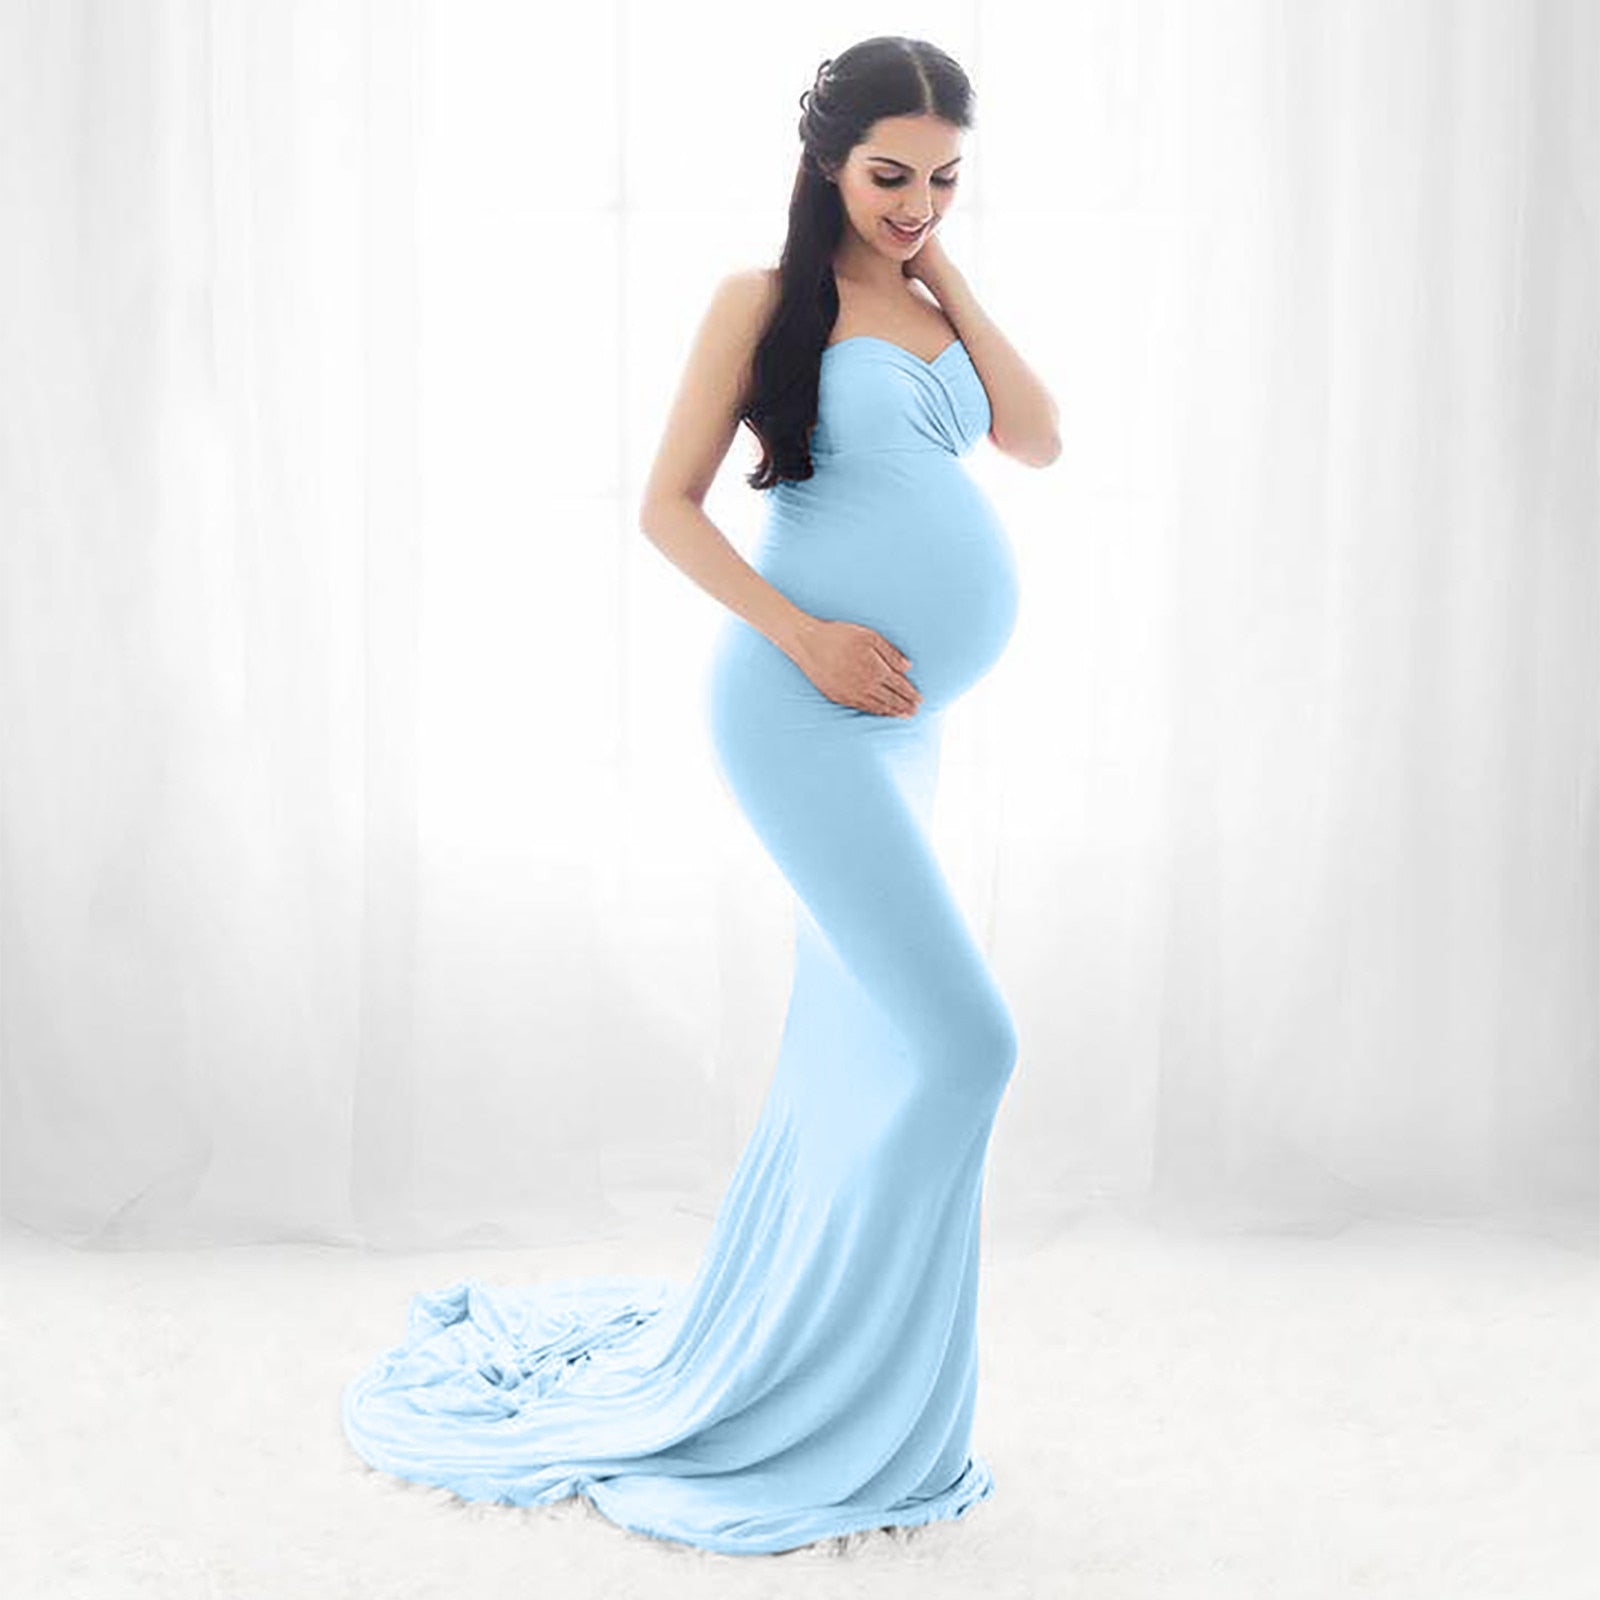 New 2023 Women Pregnant Dress Sexy Sleeveless Strapless Dress For Photography P